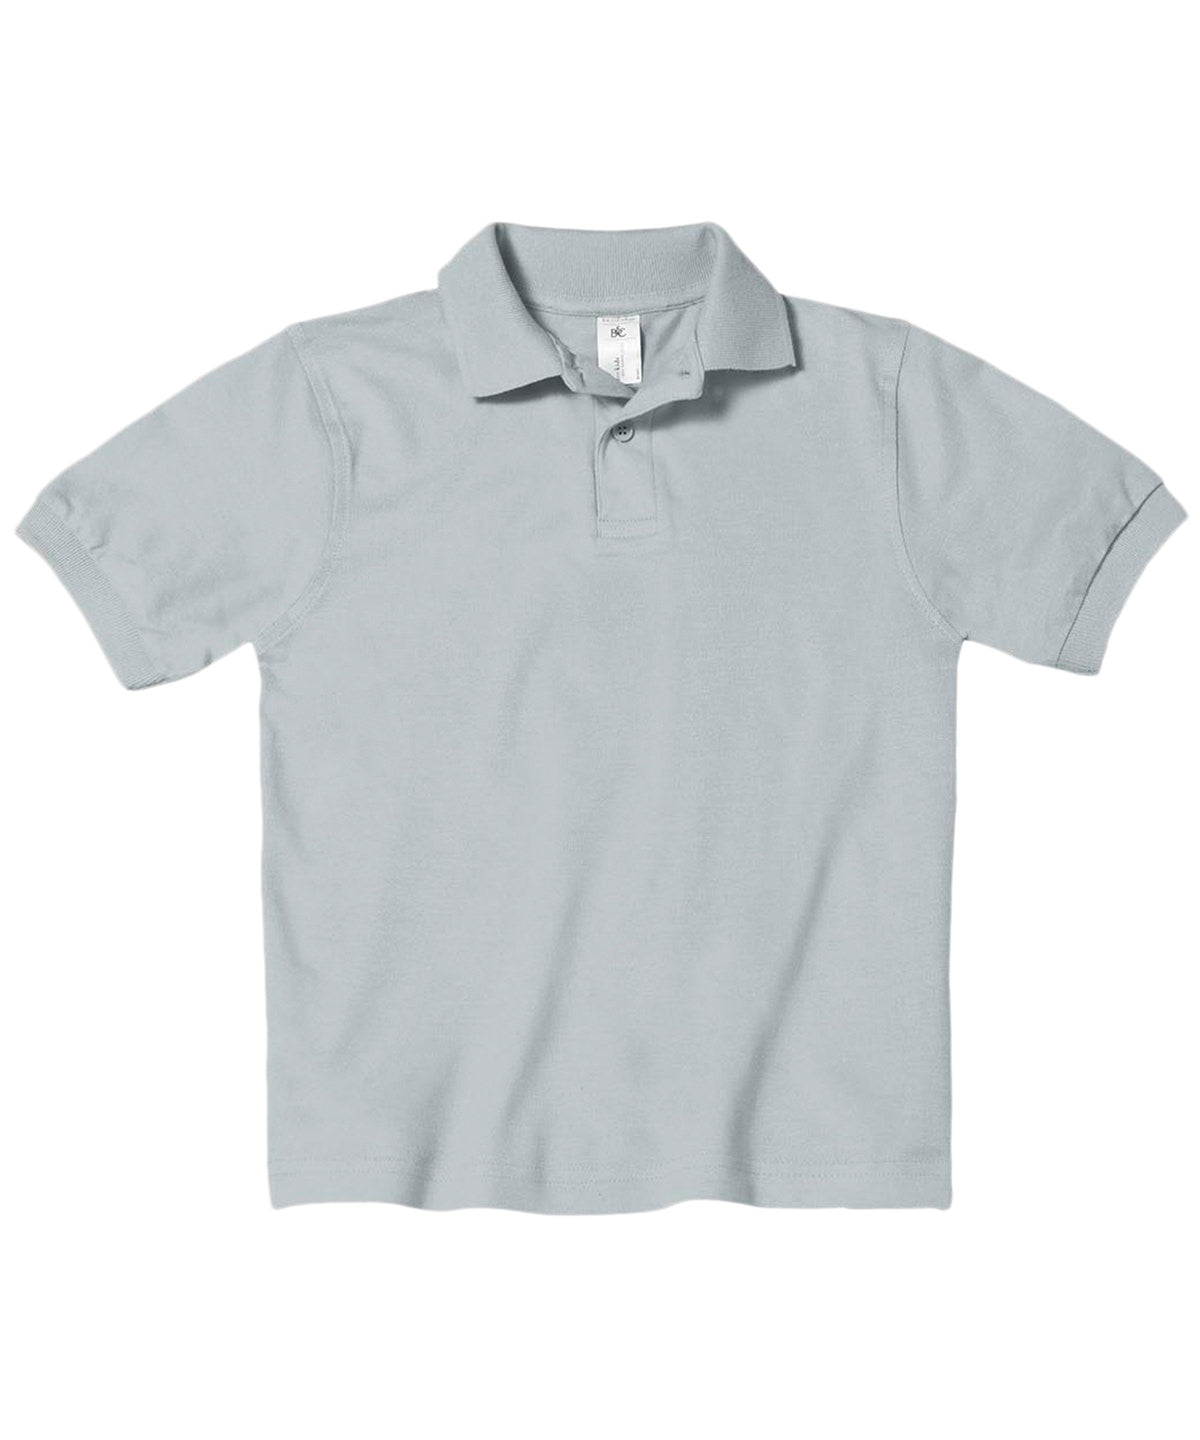 Personalised Polo Shirts - Navy B&C Collection B&C Safran /kids